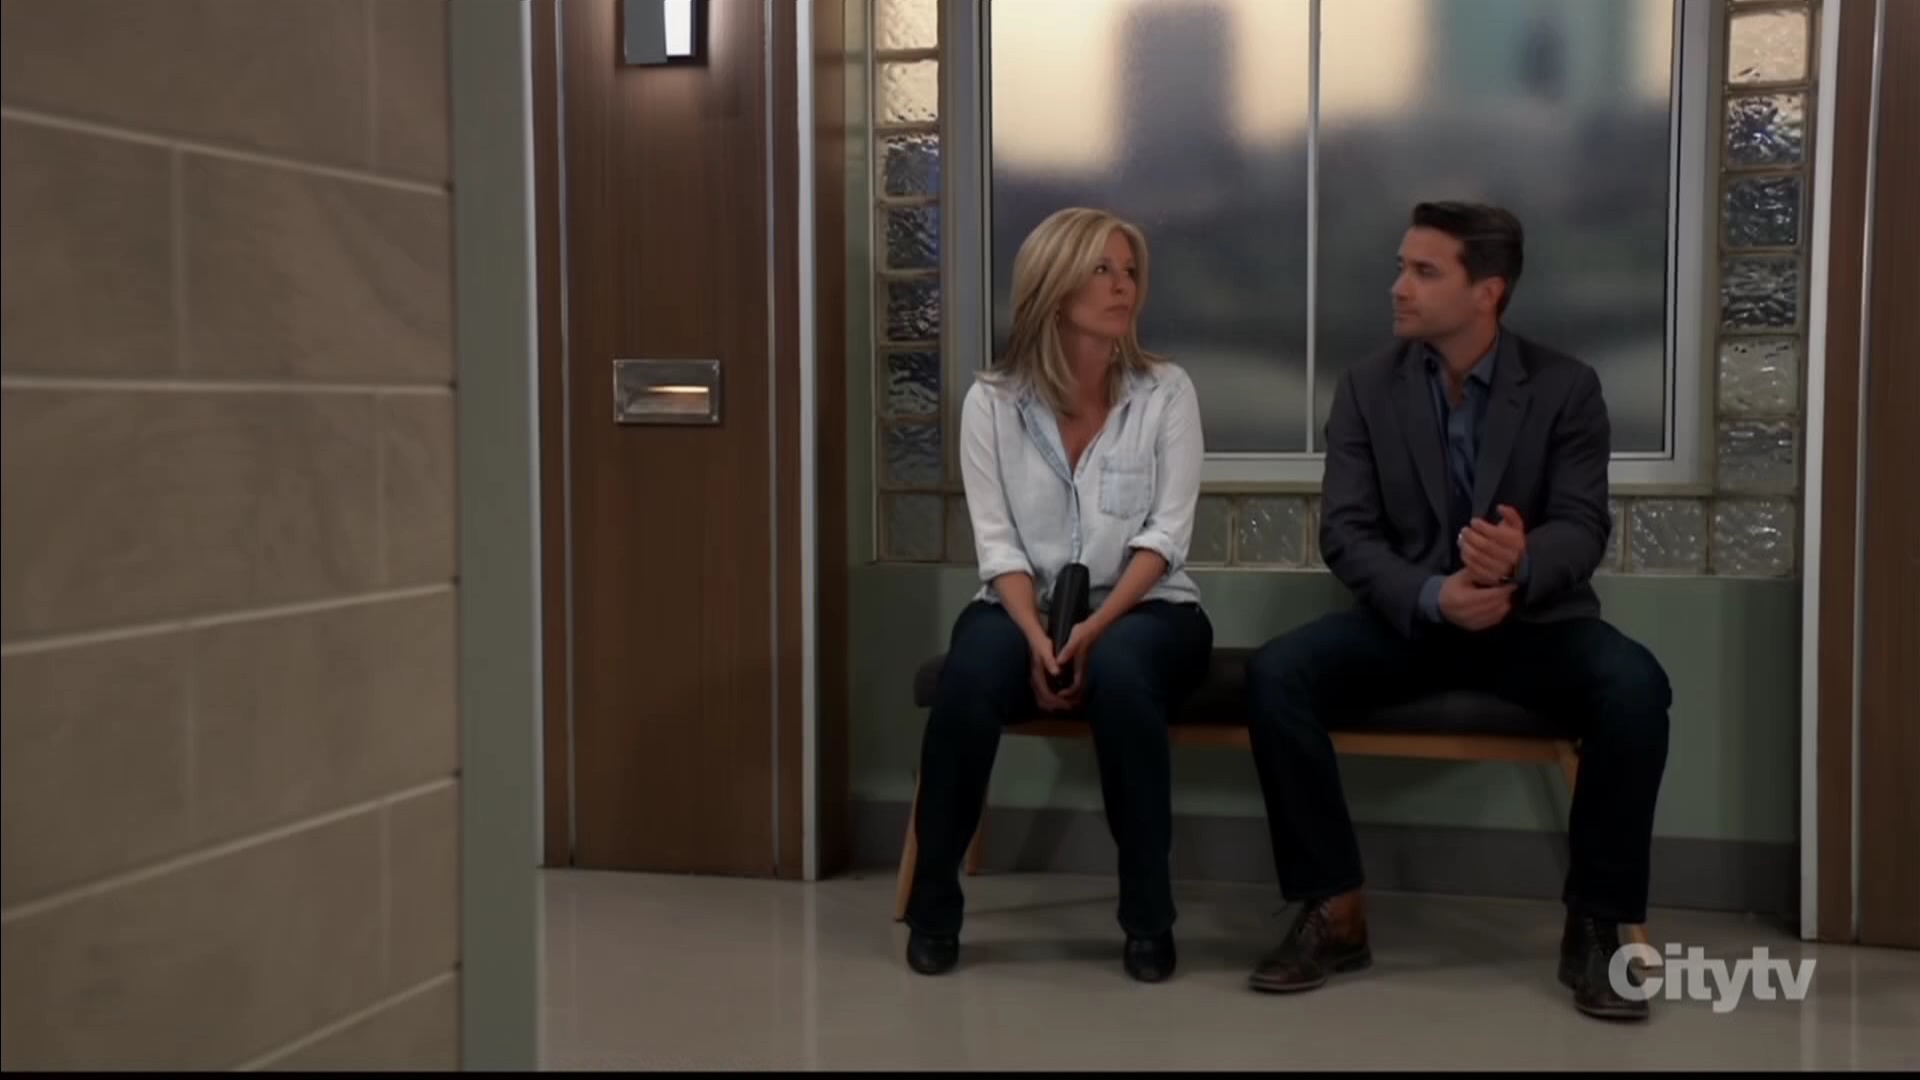 dante and carly discussion at gh